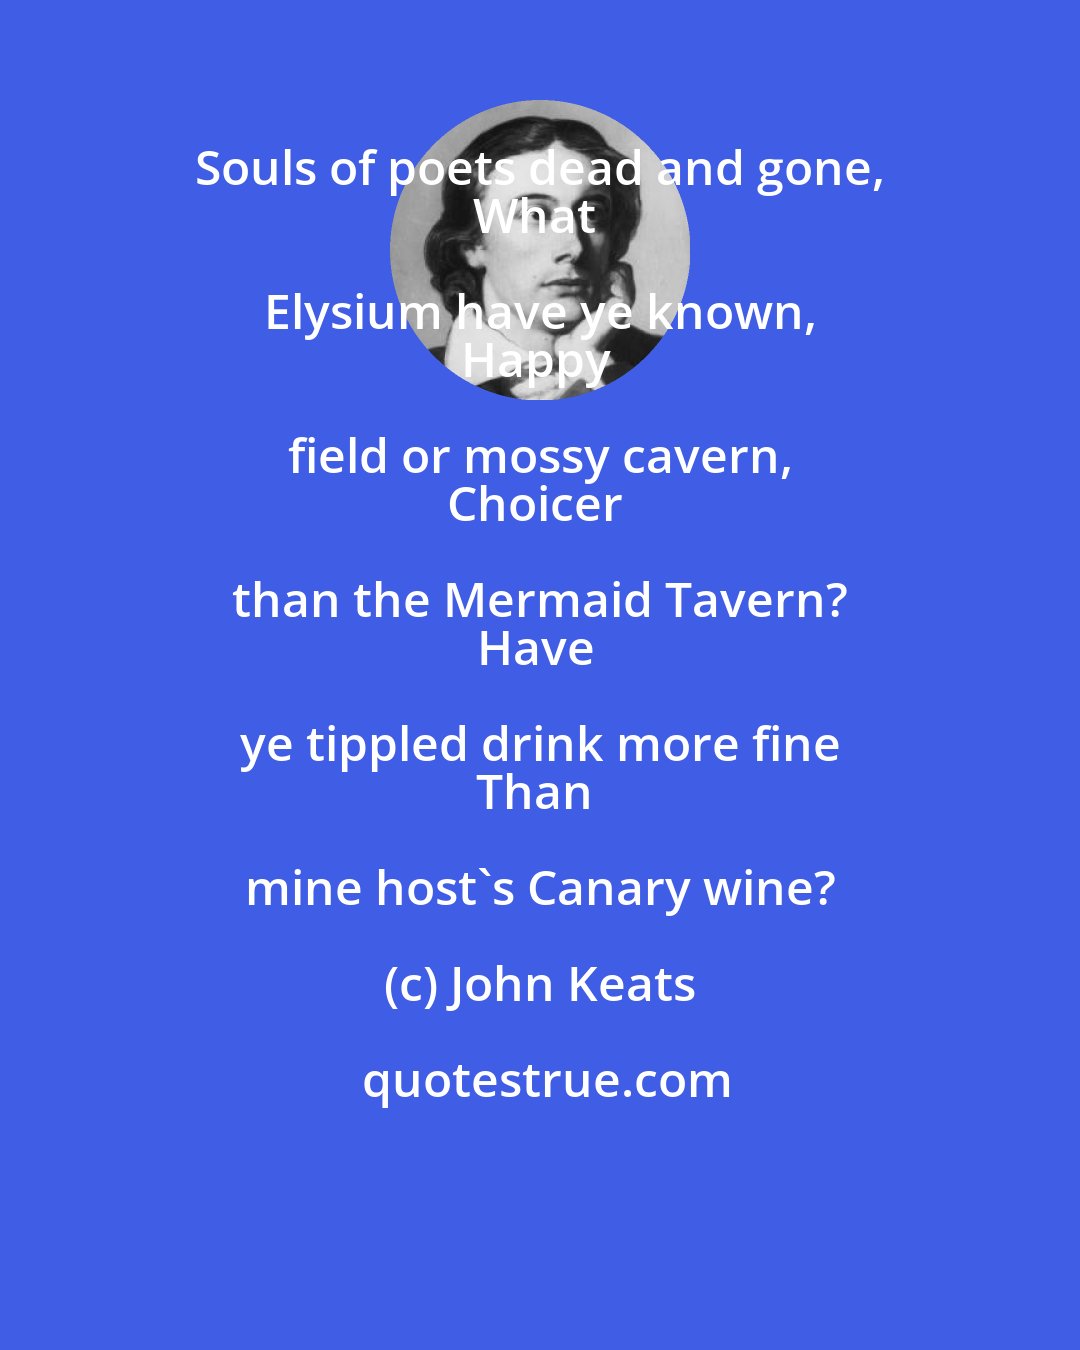 John Keats: Souls of poets dead and gone, 
What Elysium have ye known, 
Happy field or mossy cavern, 
Choicer than the Mermaid Tavern? 
Have ye tippled drink more fine 
Than mine host's Canary wine?